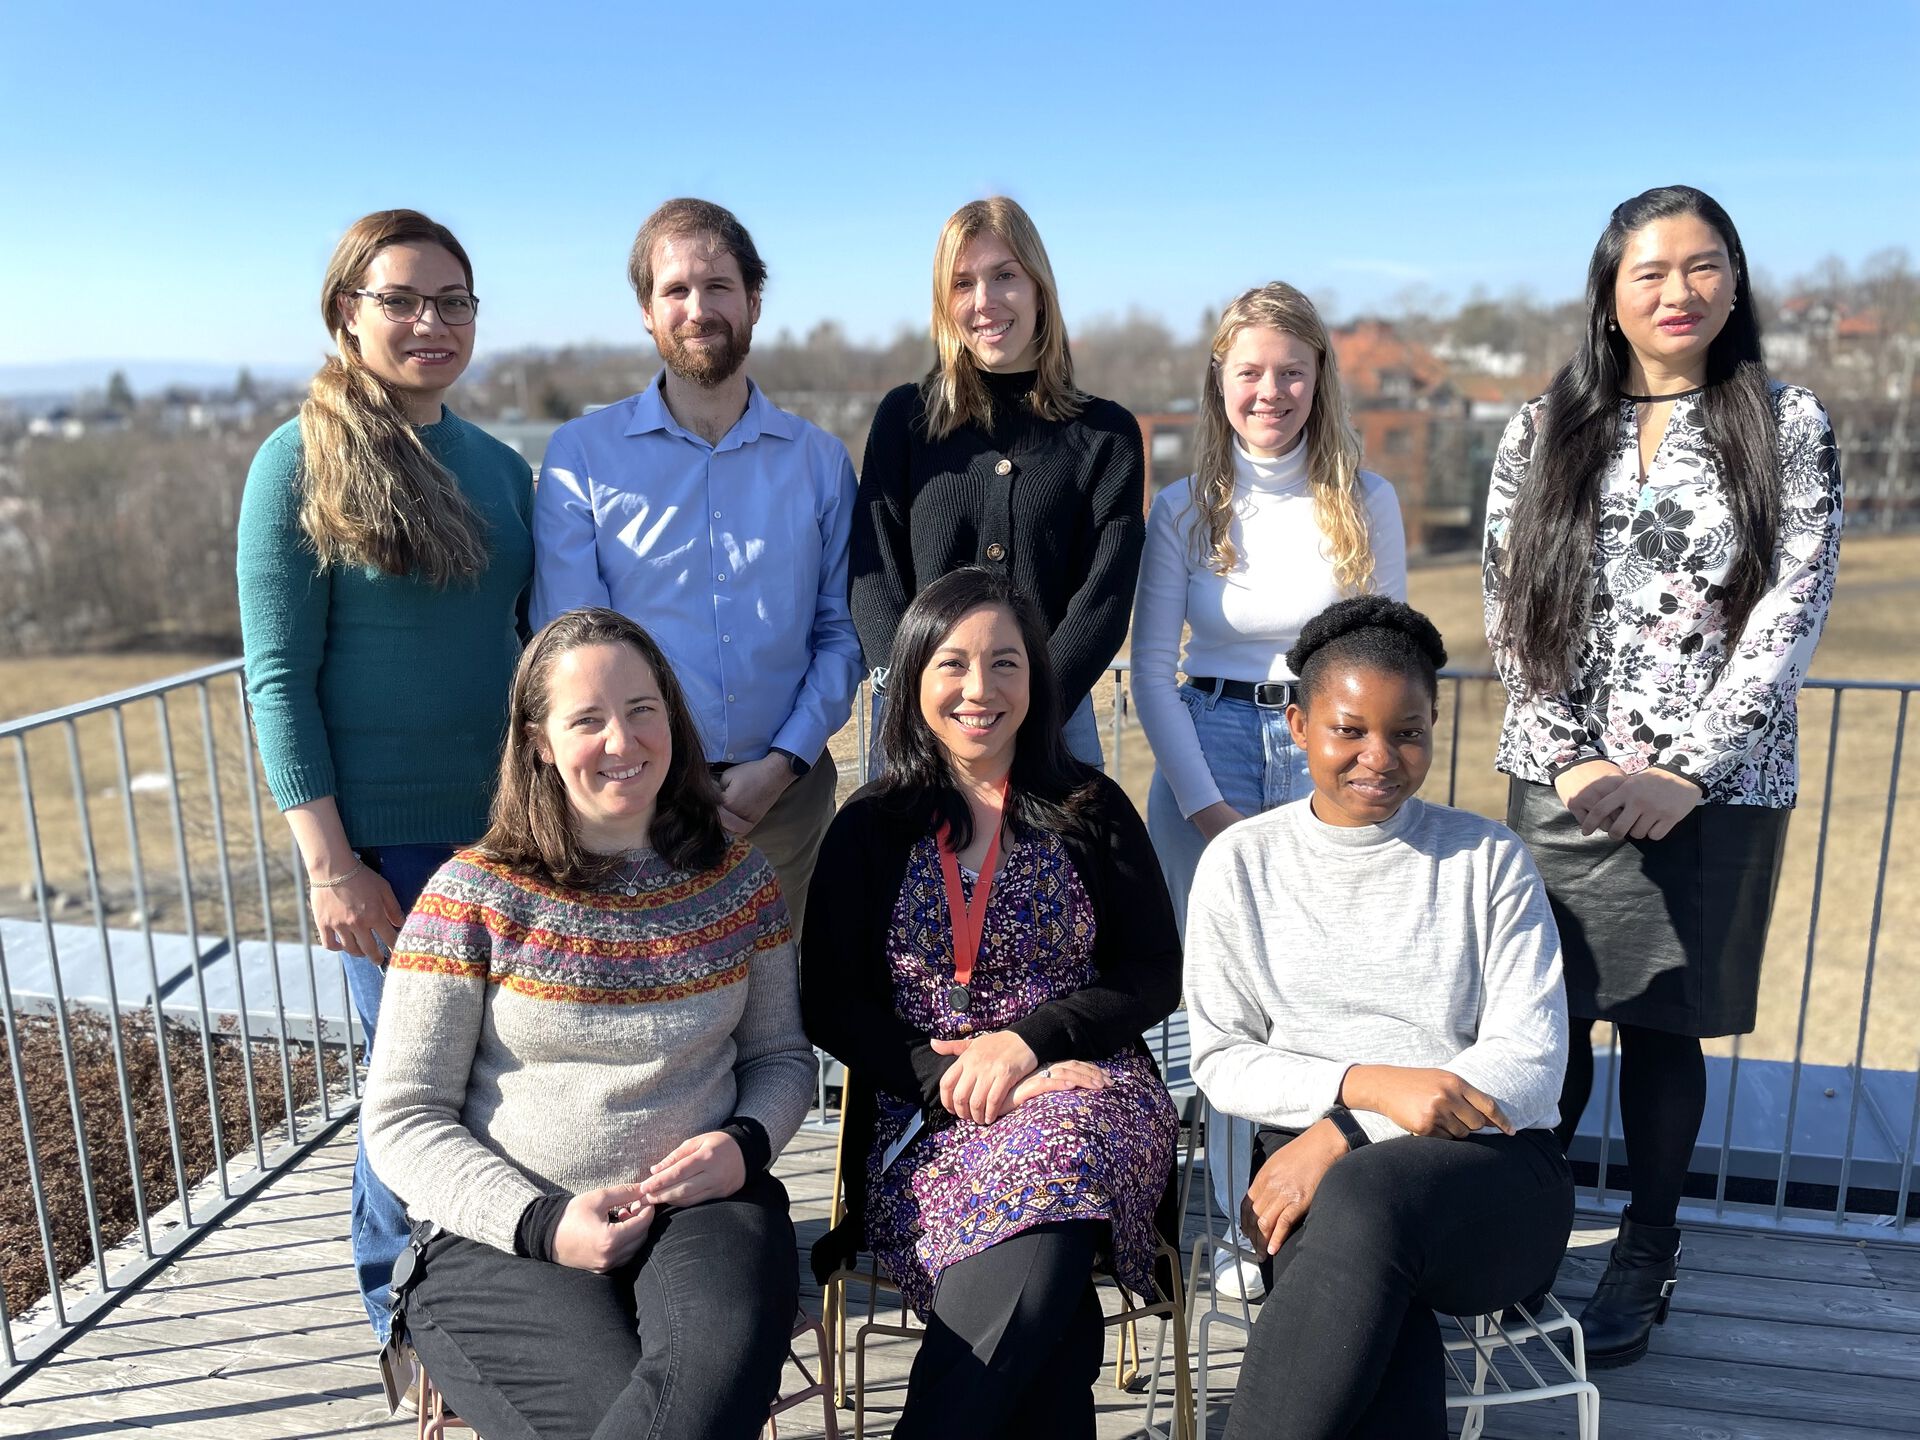 Group photo of the Chemical Neuroscience and Zebrafish Core Facility Group. They are posing on the roof of NCMM and smiling.